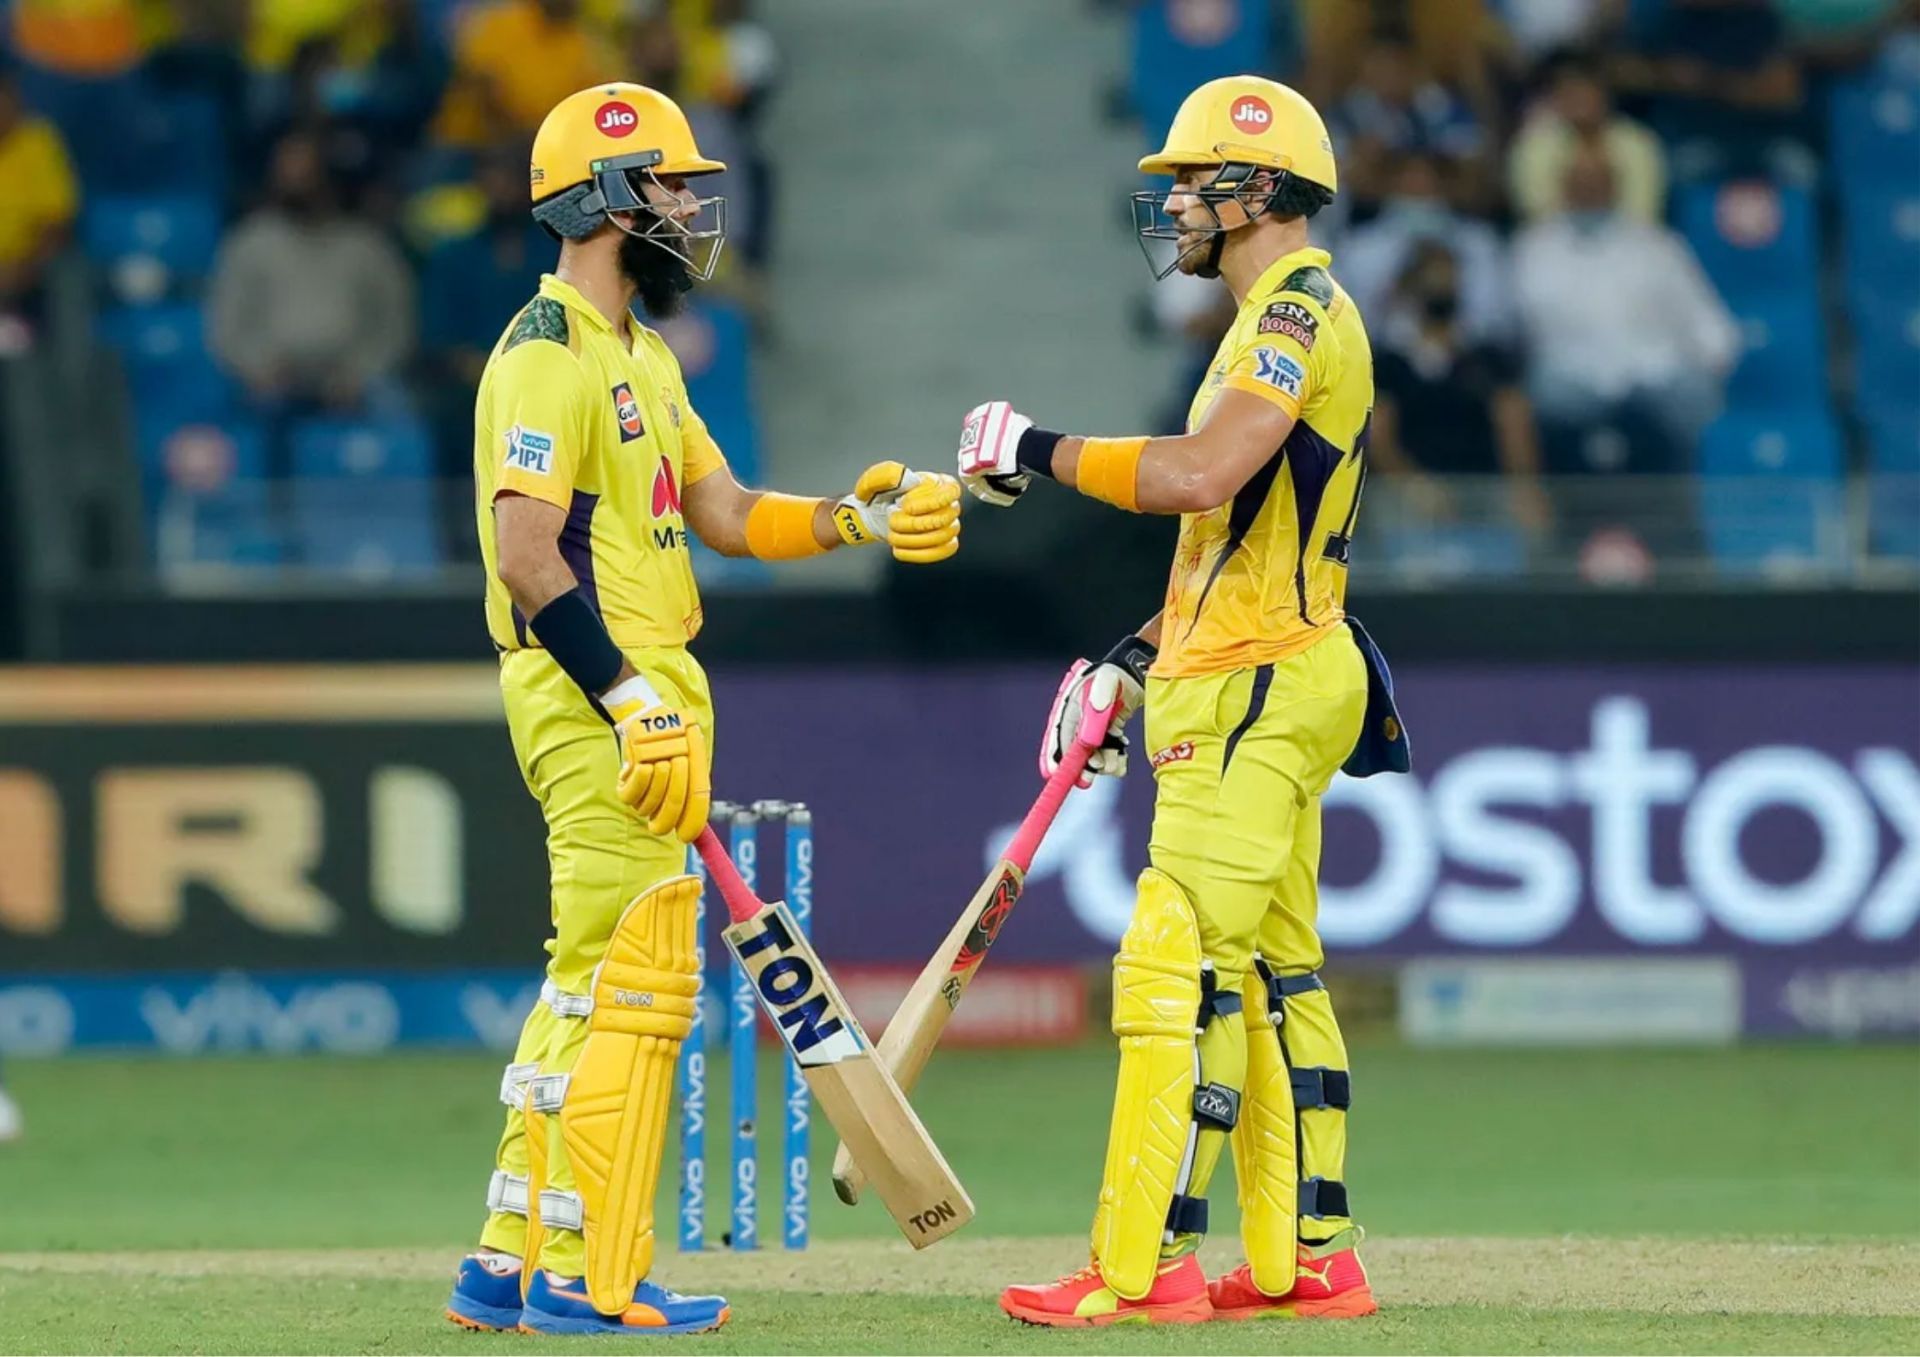 Moeen Ali will team up with Faf du Plessis once again at the CSK-owned Johannesburg franchise. (Picture Credits: IPL).